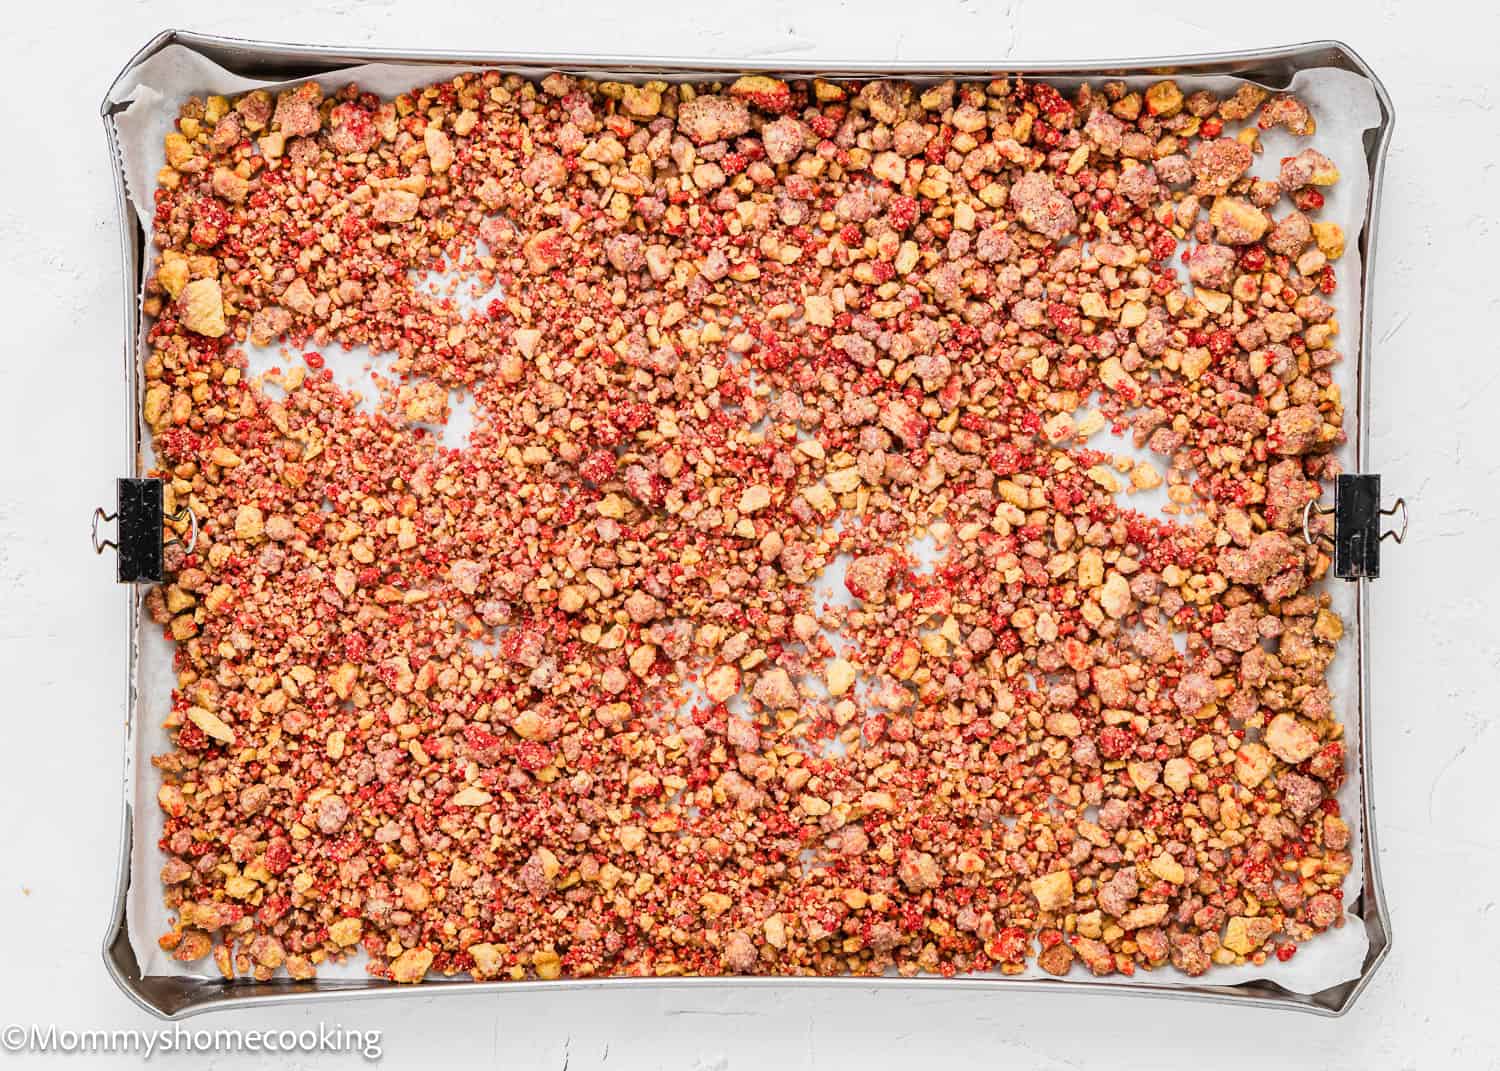 baked Strawberry Crunch dessert topping in a baking tray.